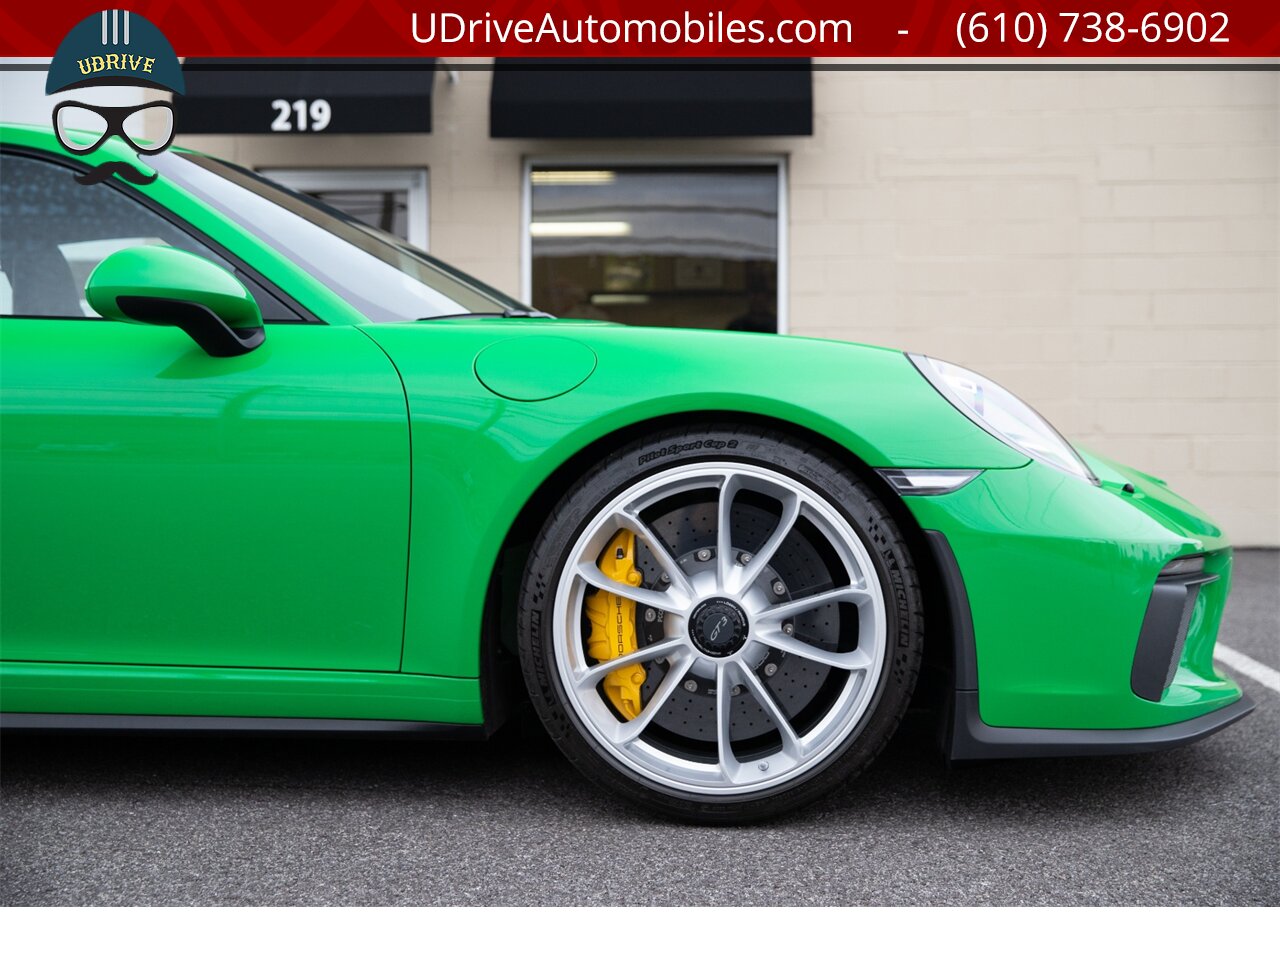 2018 Porsche 911 GT3 6 Speed Paint To Sample Viper Green 48 Miles  Front Axle Lift PCCB Carbon Bucket Seats - Photo 15 - West Chester, PA 19382